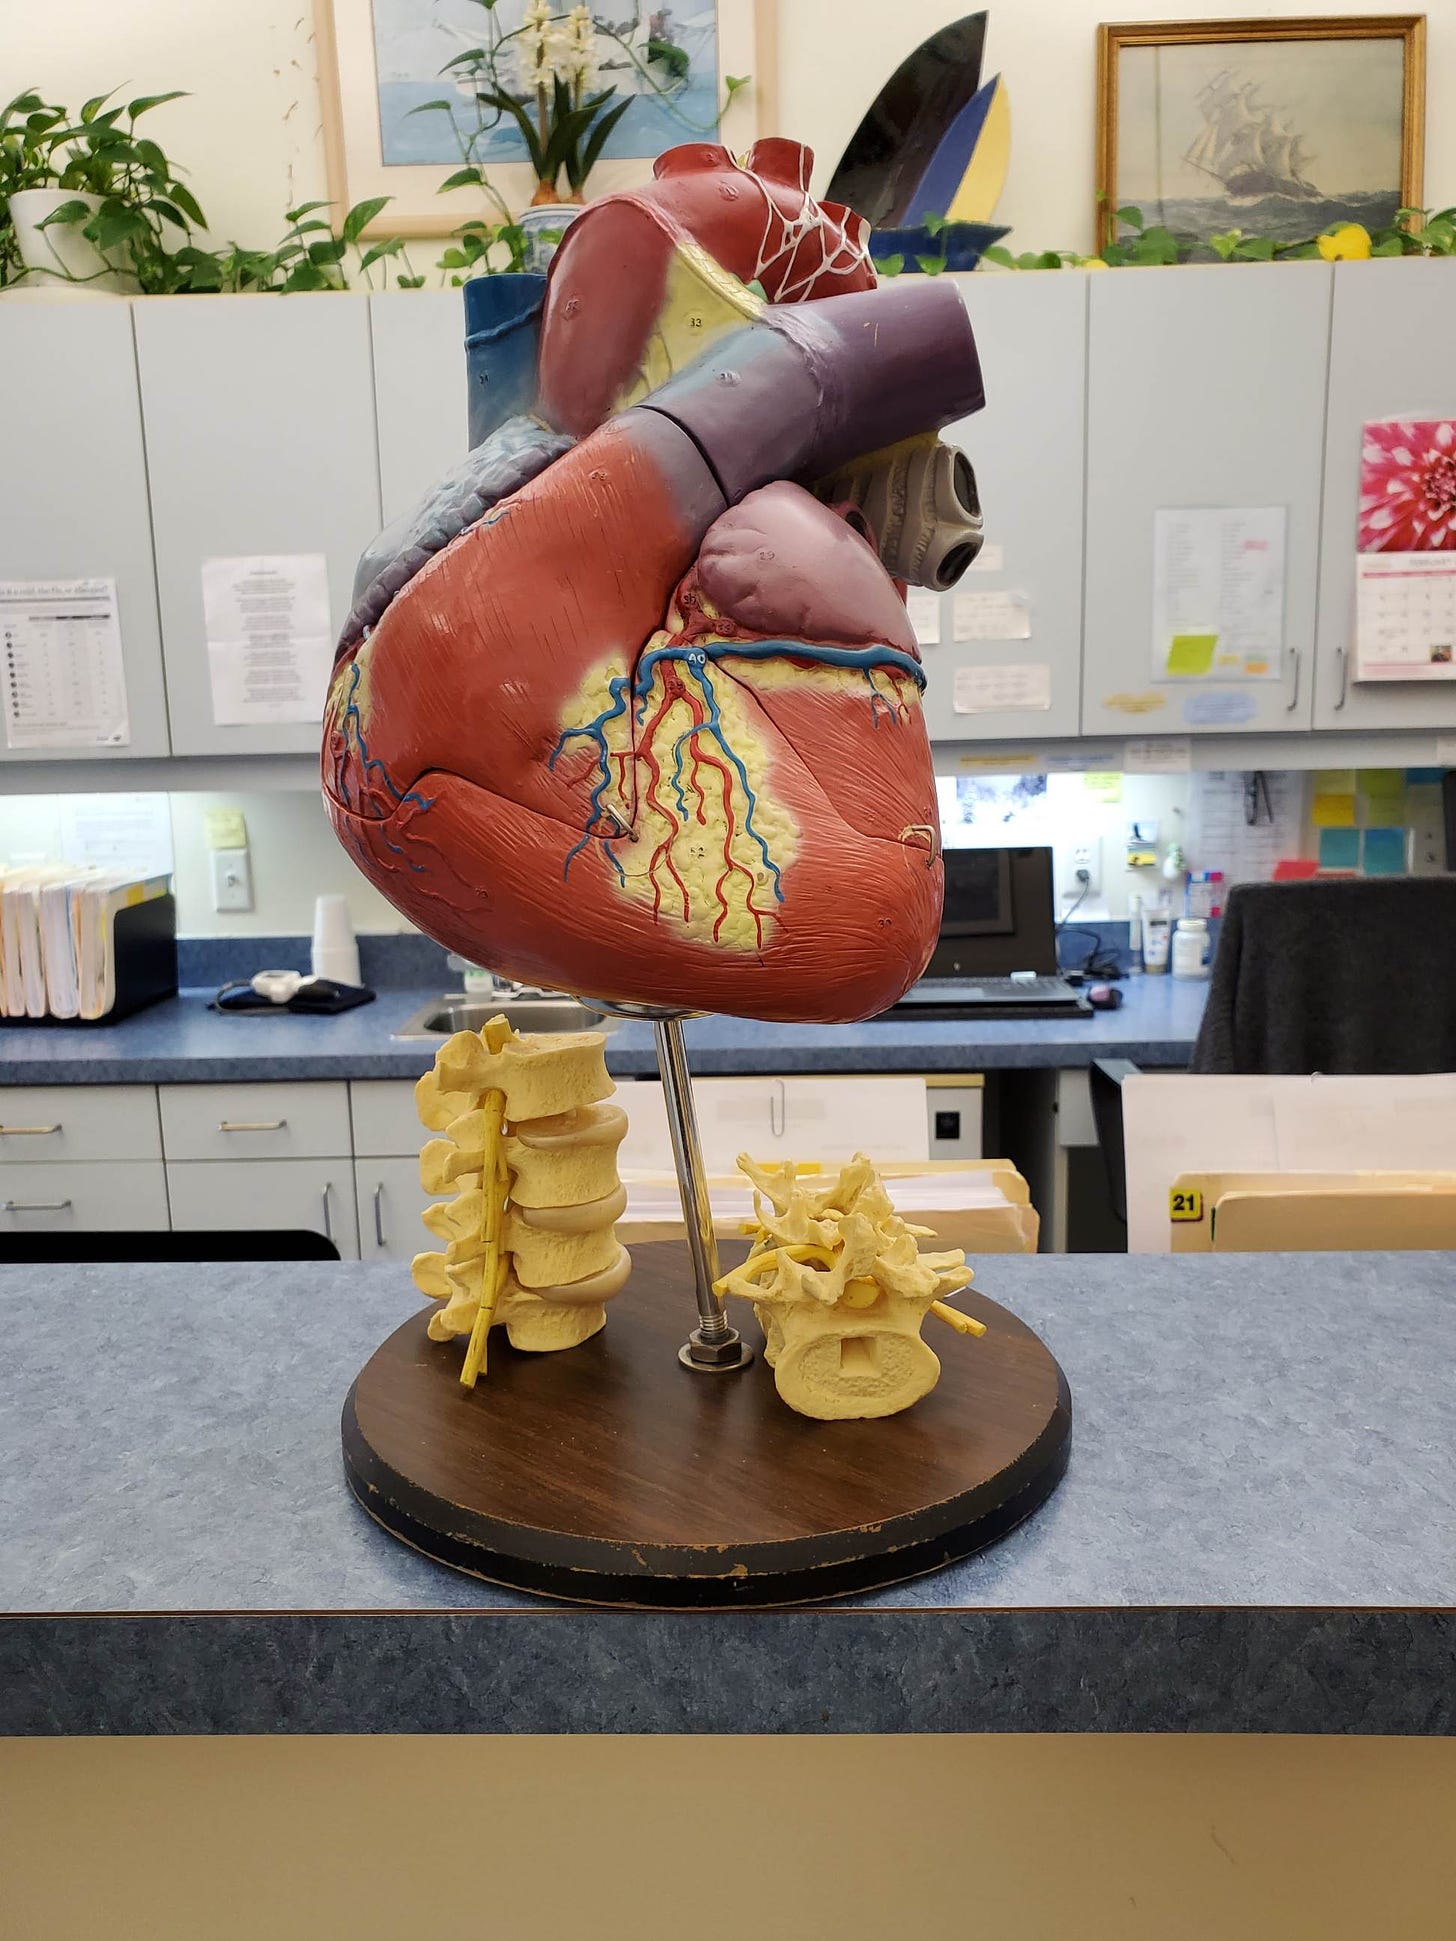 Replica of a physical heart  in a doctor's office